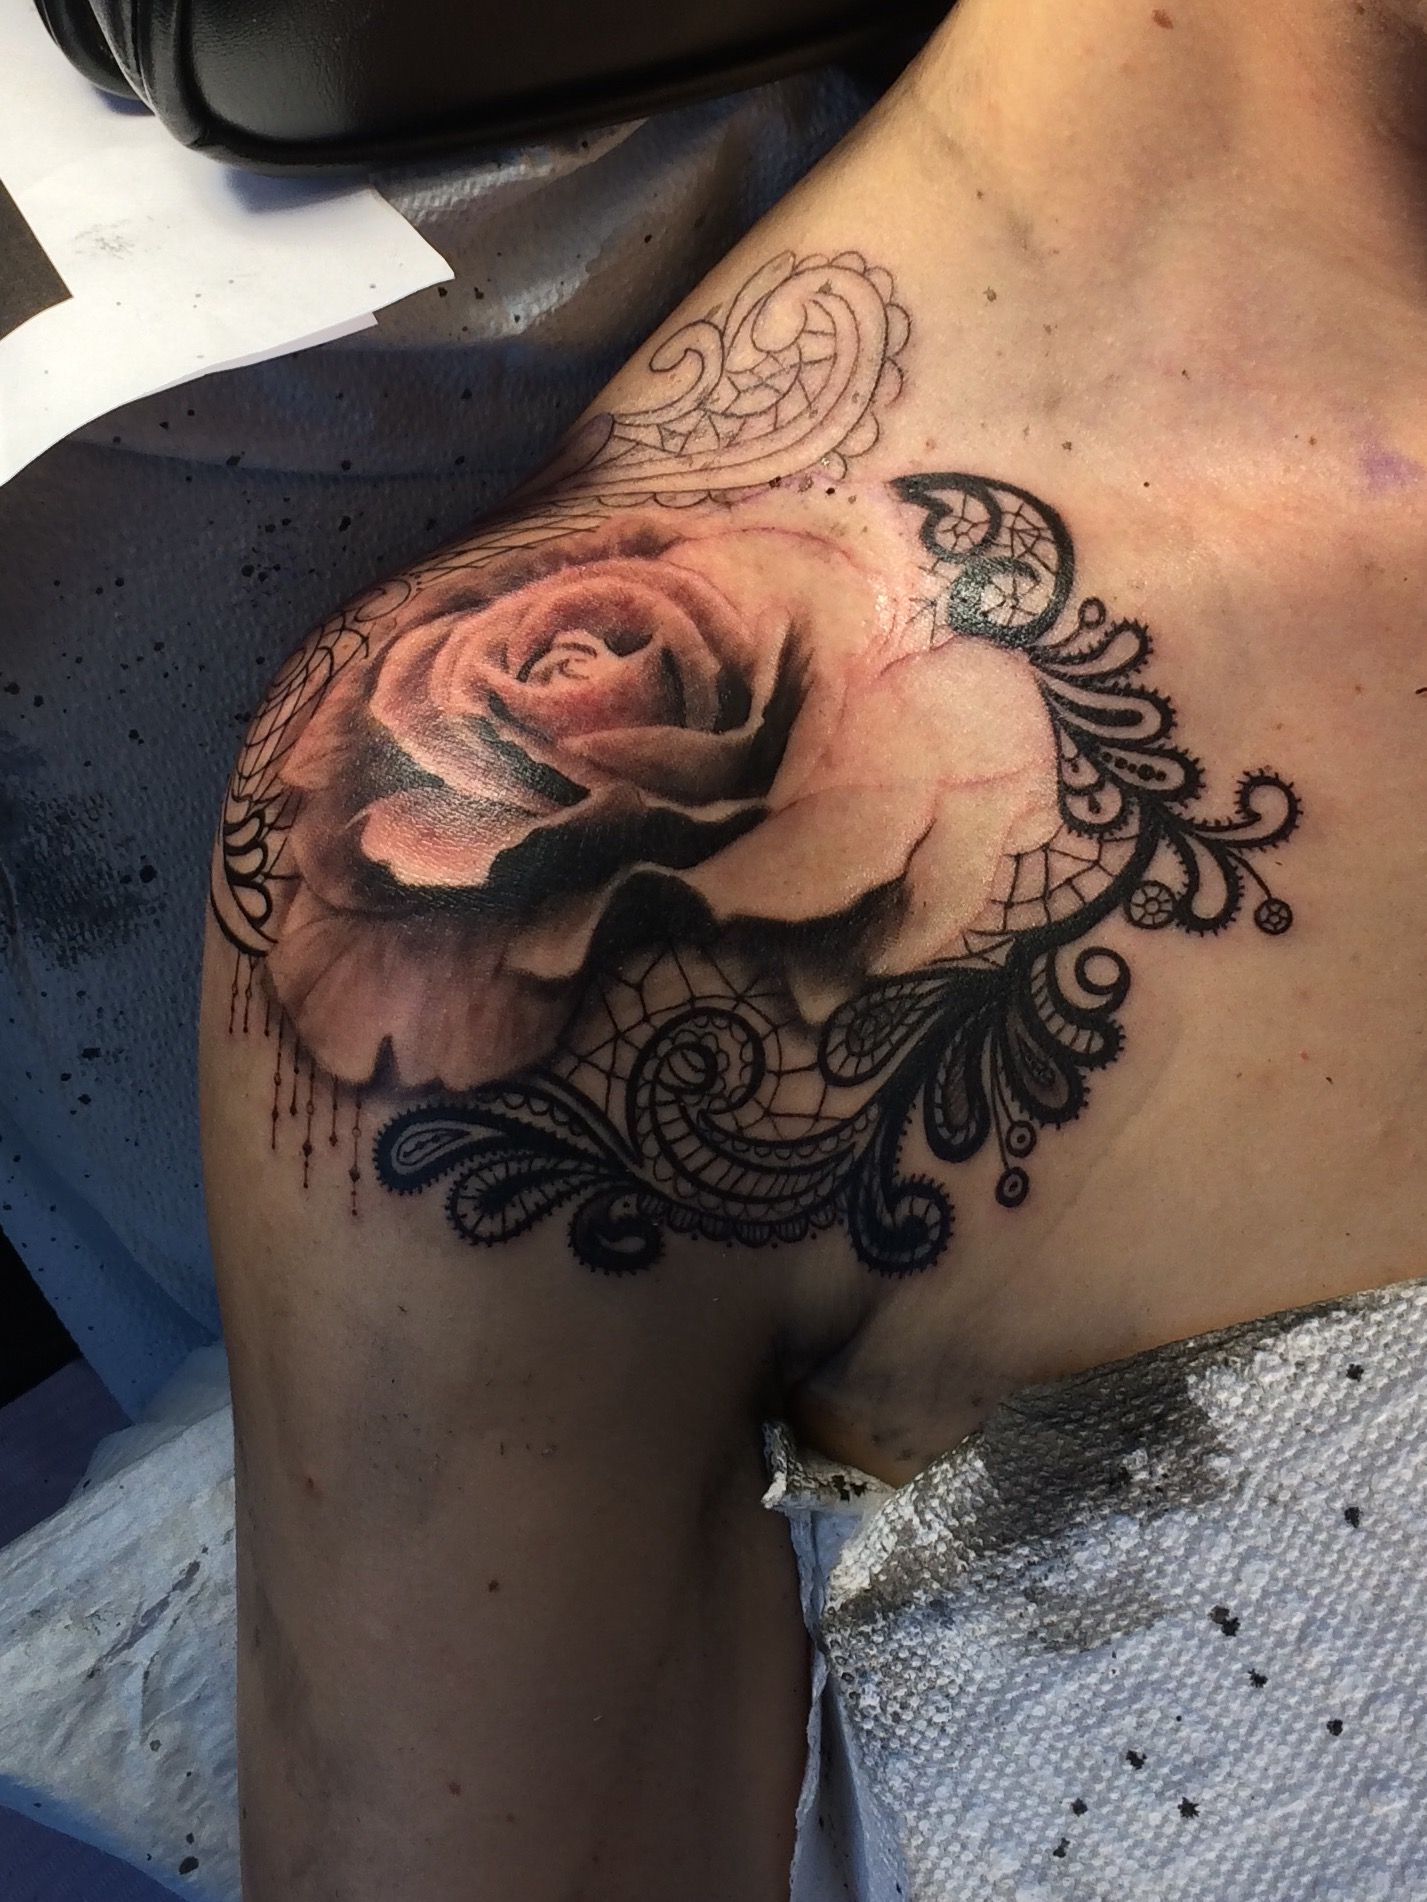 Velvet Blue Tattoos Rose Lace Work Black And White This Is within dimensions 1427 X 1902